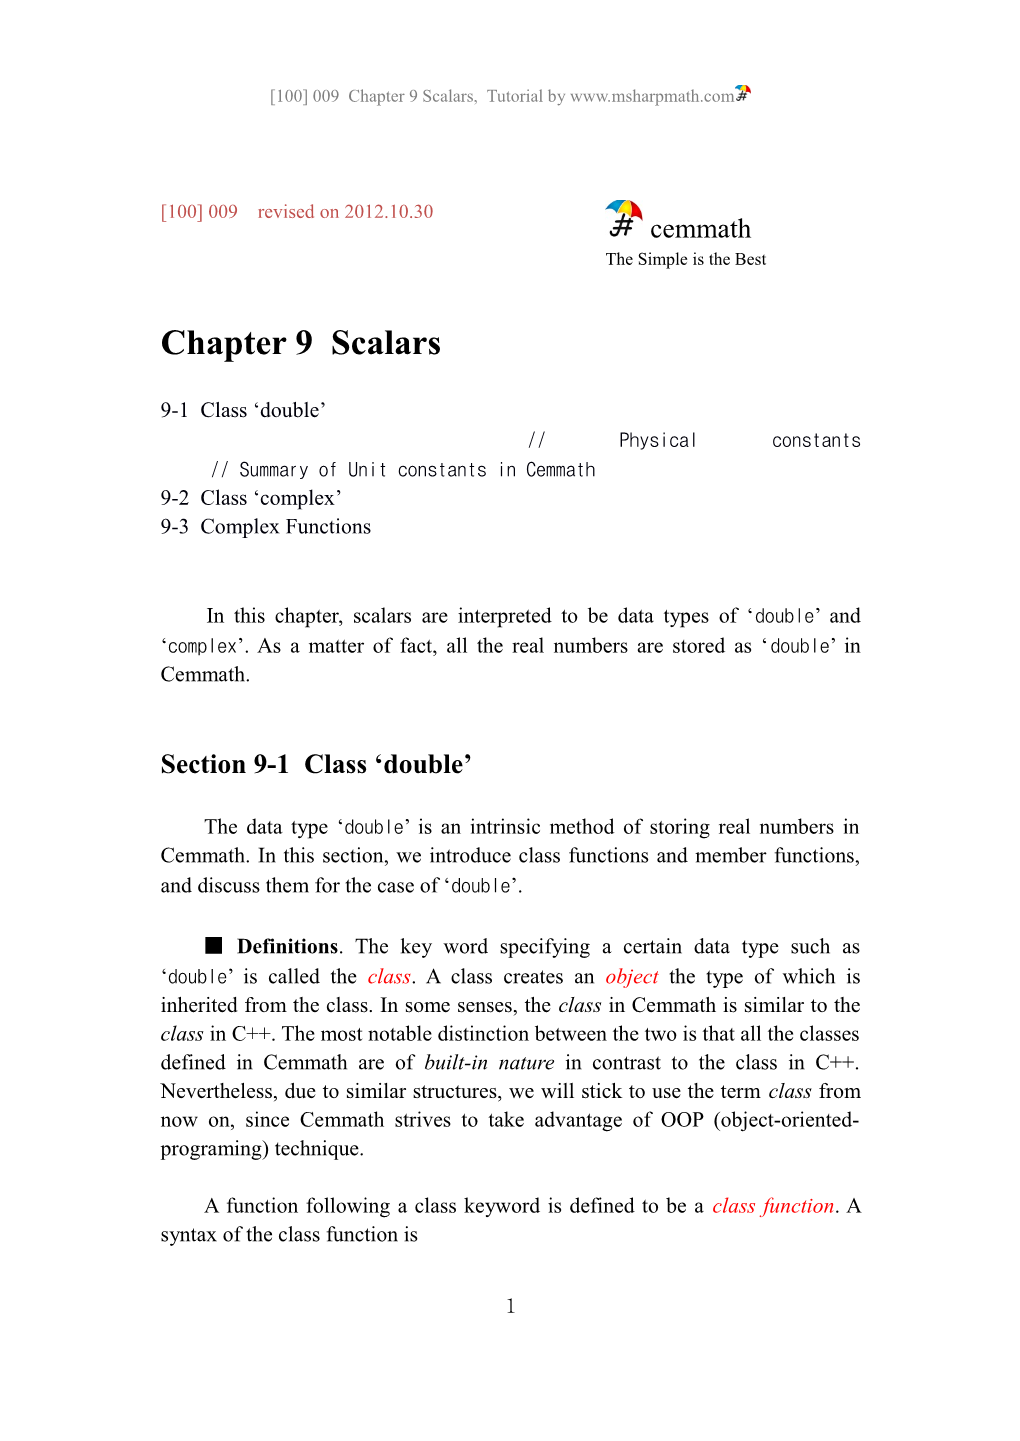 Chapter 9 Scalars